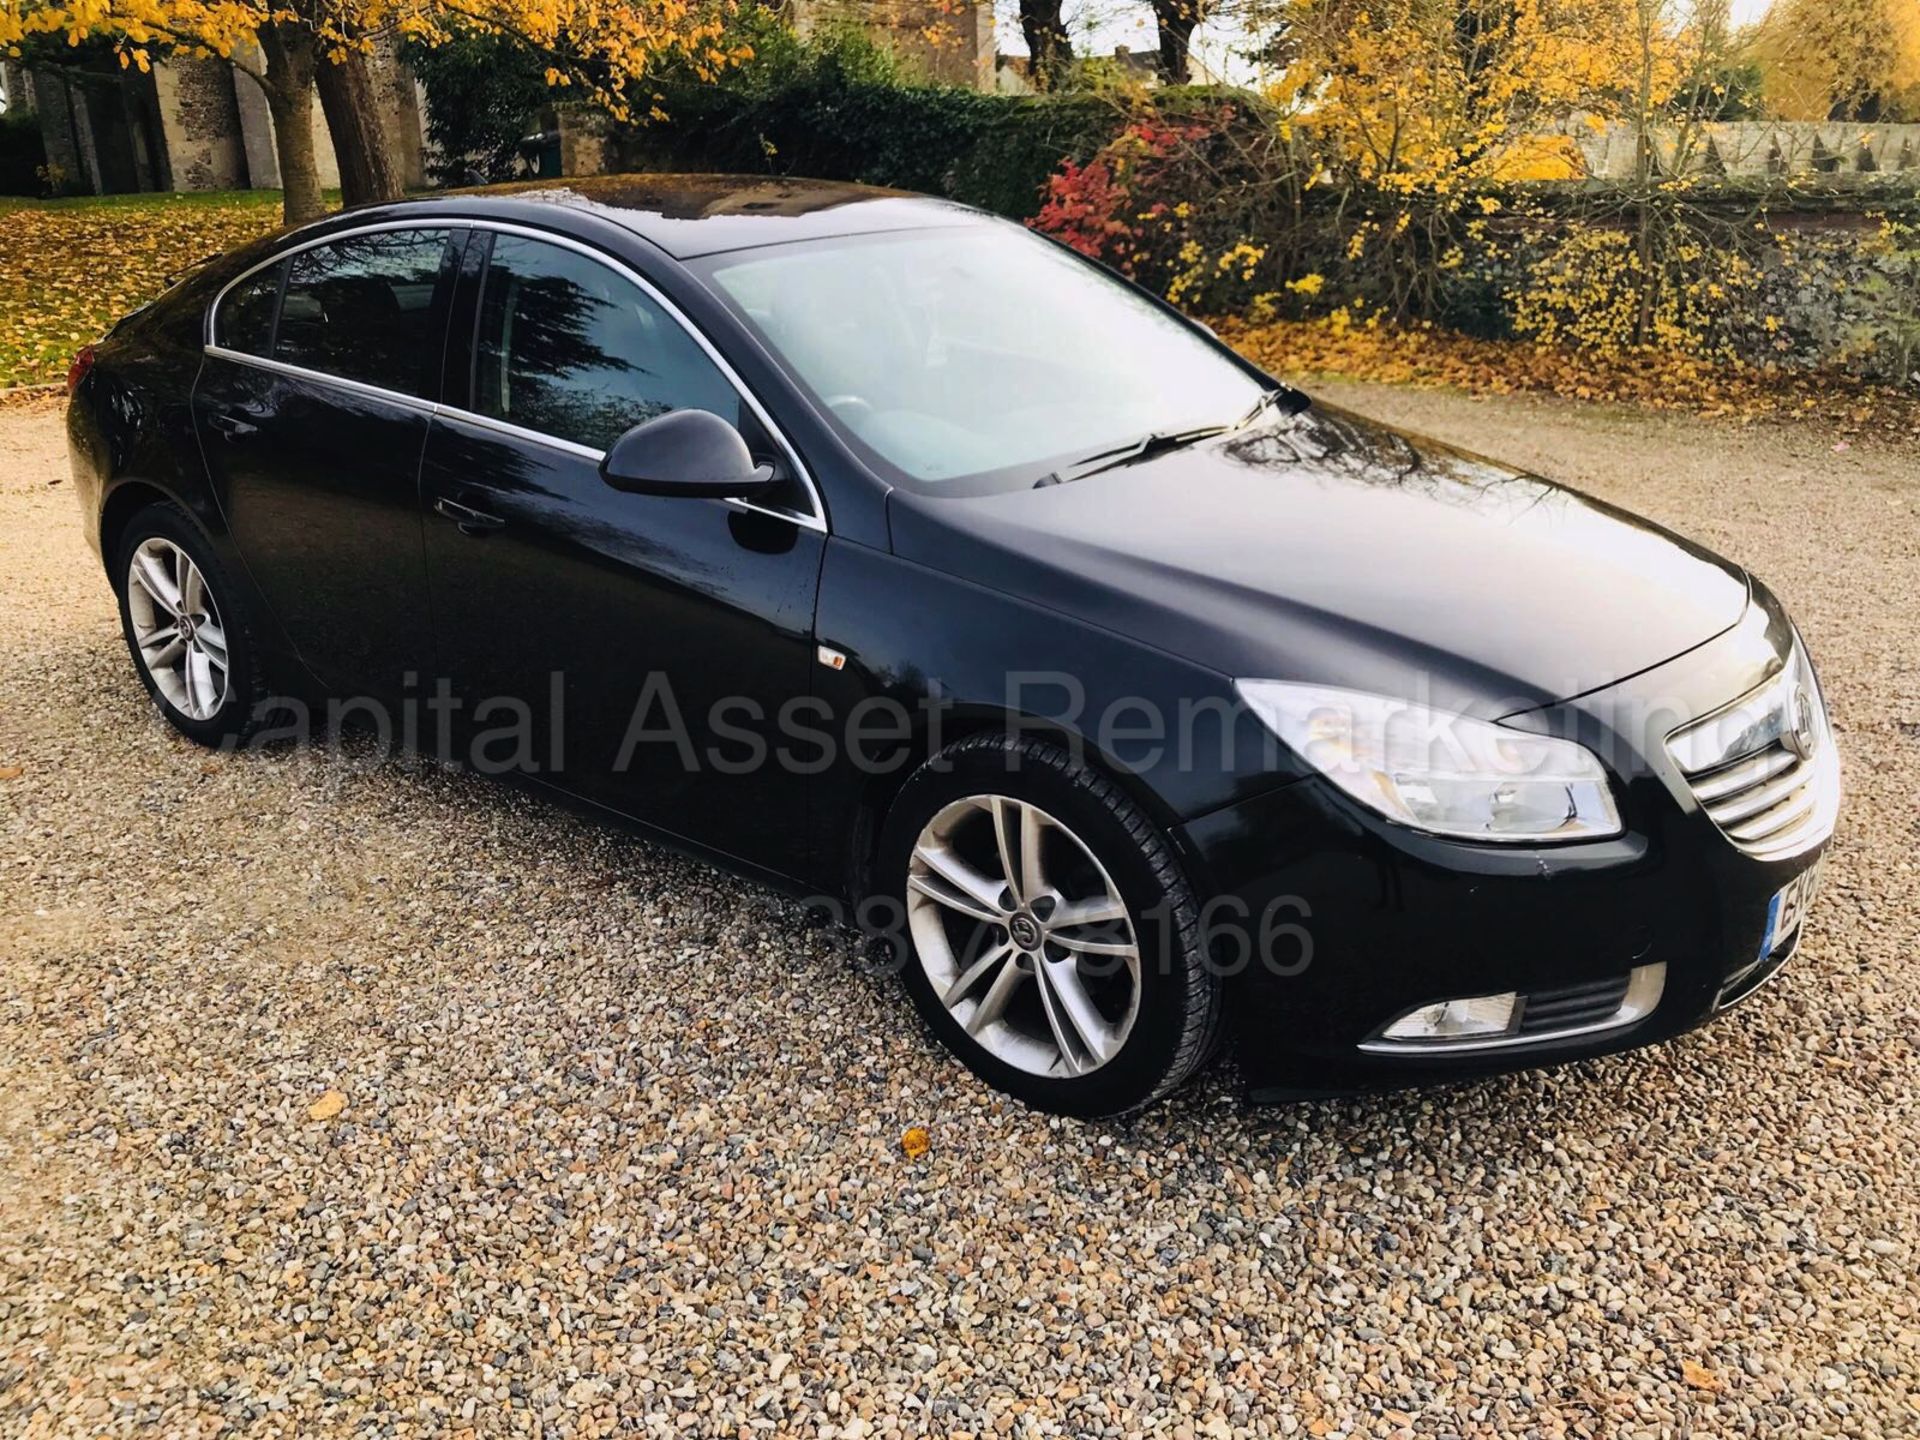 On Sale VAUXHALL INSIGNIA 'EXCLUSIVE' (2012 MODEL) '2.0 CDTI - 130 BHP - 6 SPEED - STOP/START' *A/C